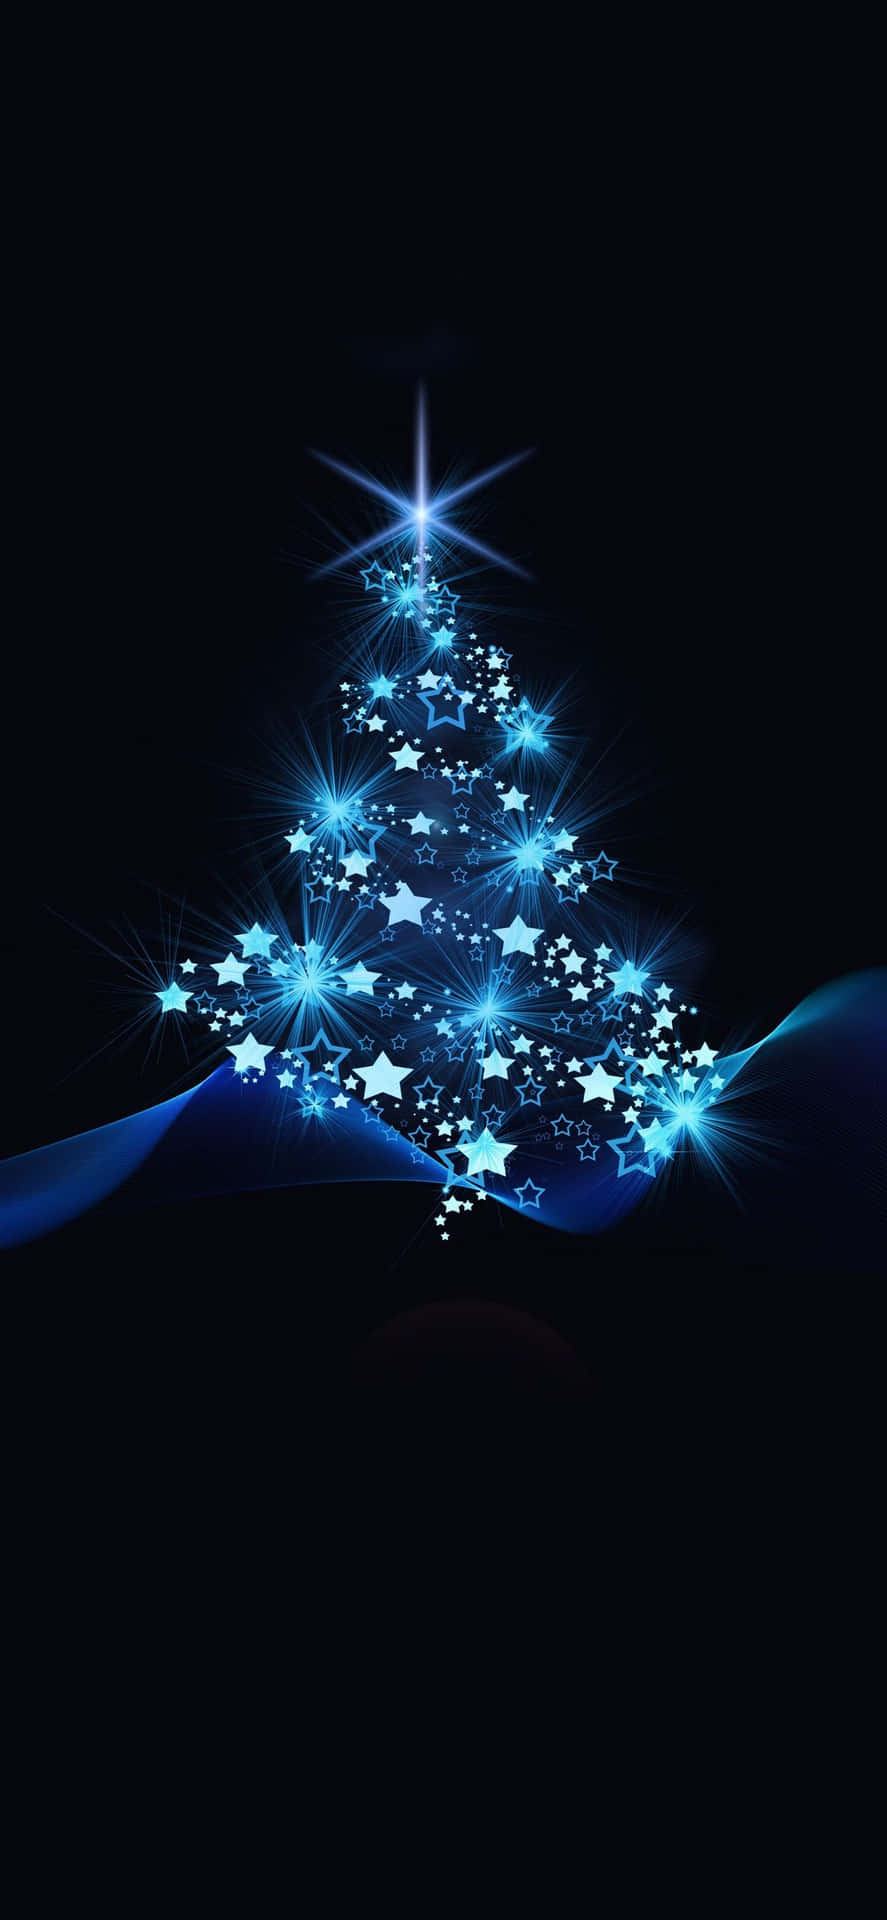 Add a touch of blue to this cozy Christmas season! Wallpaper